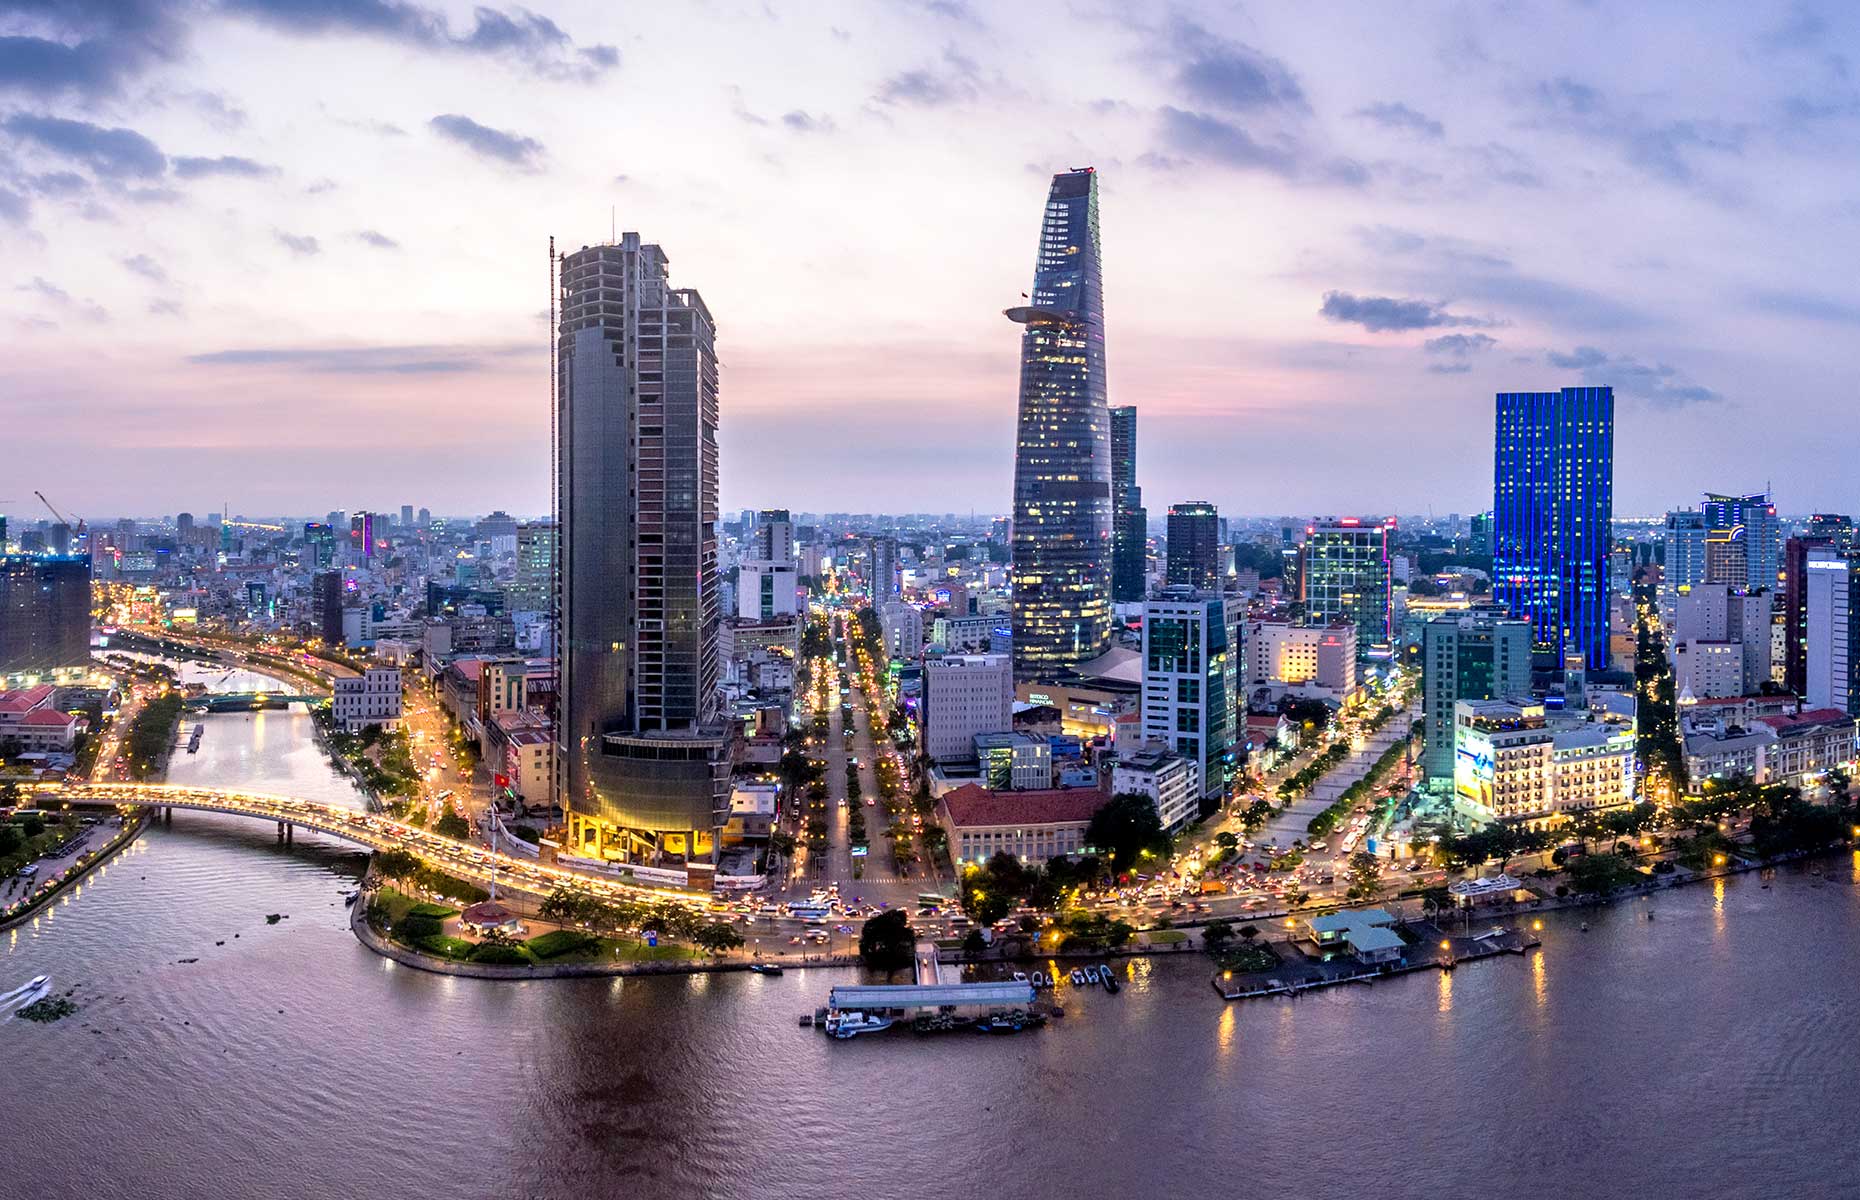 Ho Chi Minh City is now accessible on a river cruise thanks to new ship Emerald Harmony (Image: Nguyen Quang Ngoc Tonkin/Shutterstock)